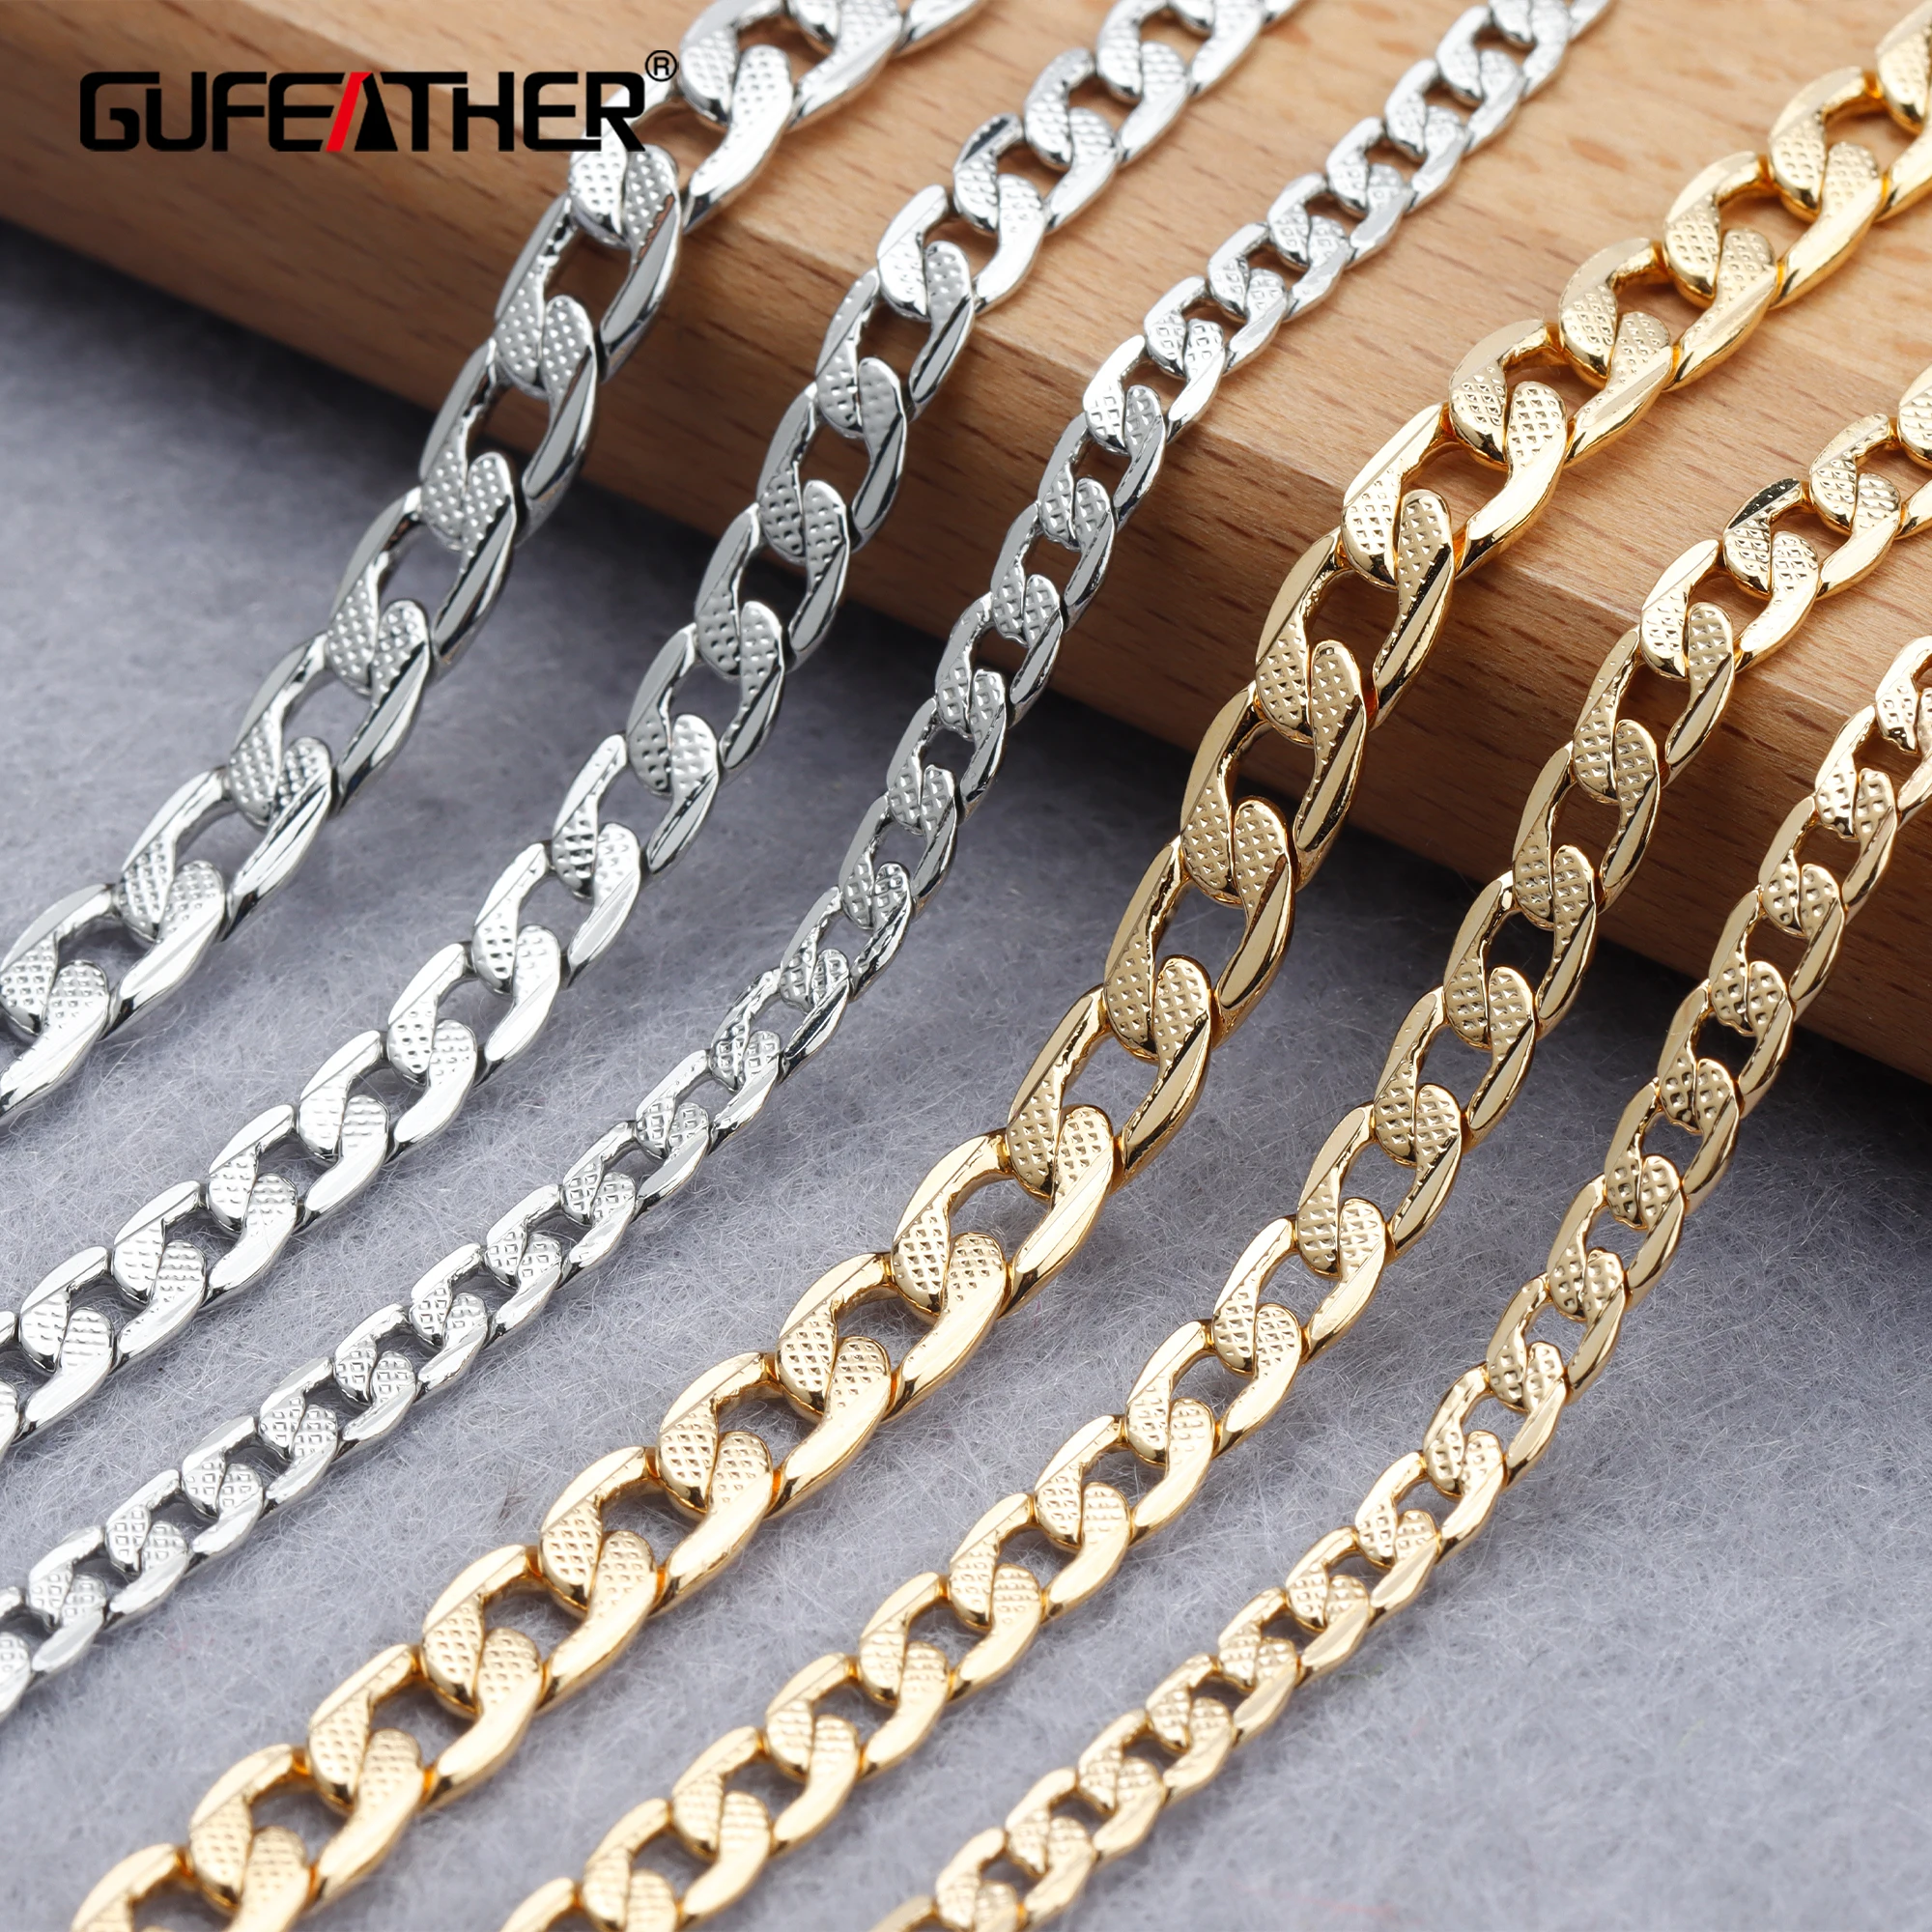 

GUFEATHER C151,jewelry accessories,pass REACH,nickel free,diy chain,18k gold plated,copper,diy necklace,jewelry making,1m/lot